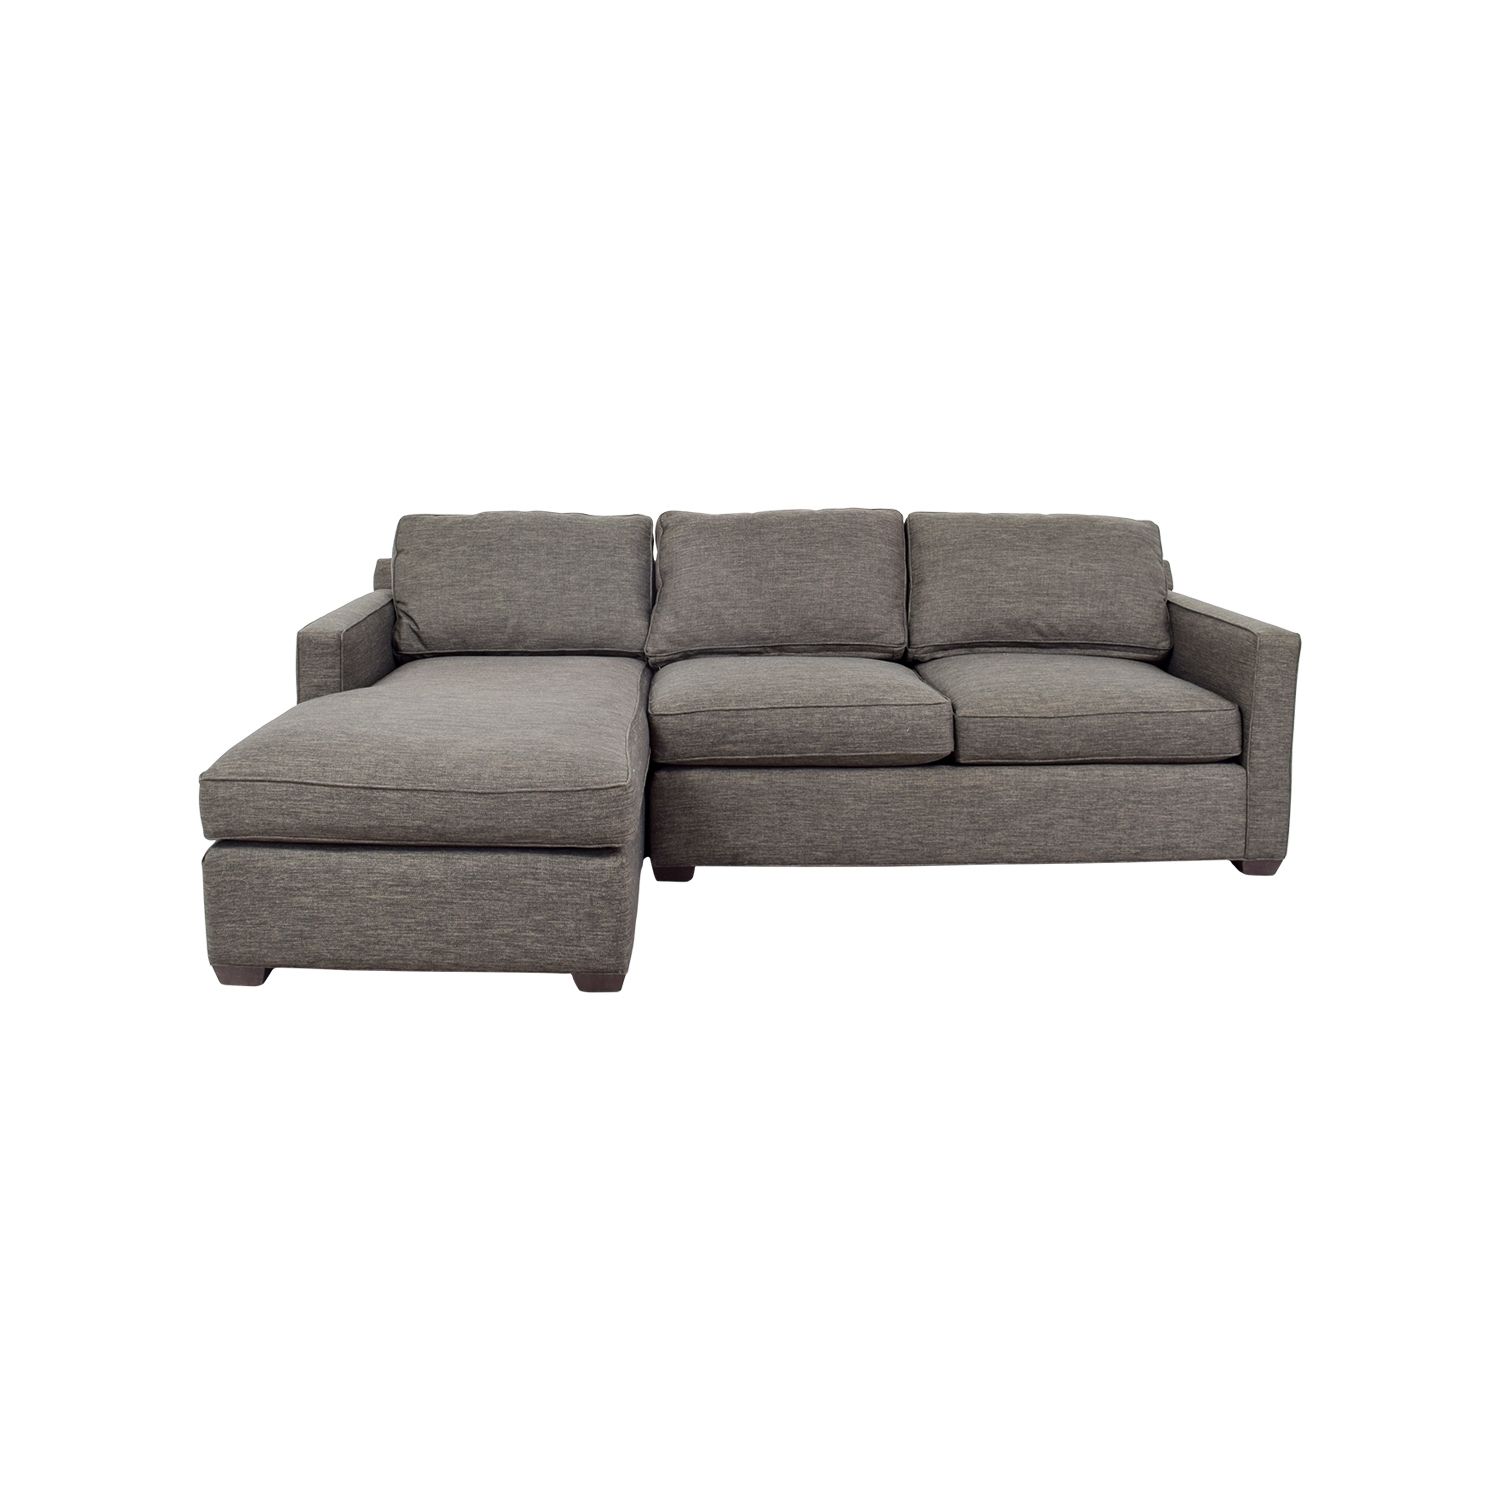 [%63% Off – Crate And Barrel Crate & Barrel Davis Grey Chaise Within Most Recently Released Crate And Barrel Chaises|Crate And Barrel Chaises In Most Up To Date 63% Off – Crate And Barrel Crate & Barrel Davis Grey Chaise|Current Crate And Barrel Chaises Within 63% Off – Crate And Barrel Crate & Barrel Davis Grey Chaise|Most Current 63% Off – Crate And Barrel Crate & Barrel Davis Grey Chaise Inside Crate And Barrel Chaises%] (View 3 of 15)